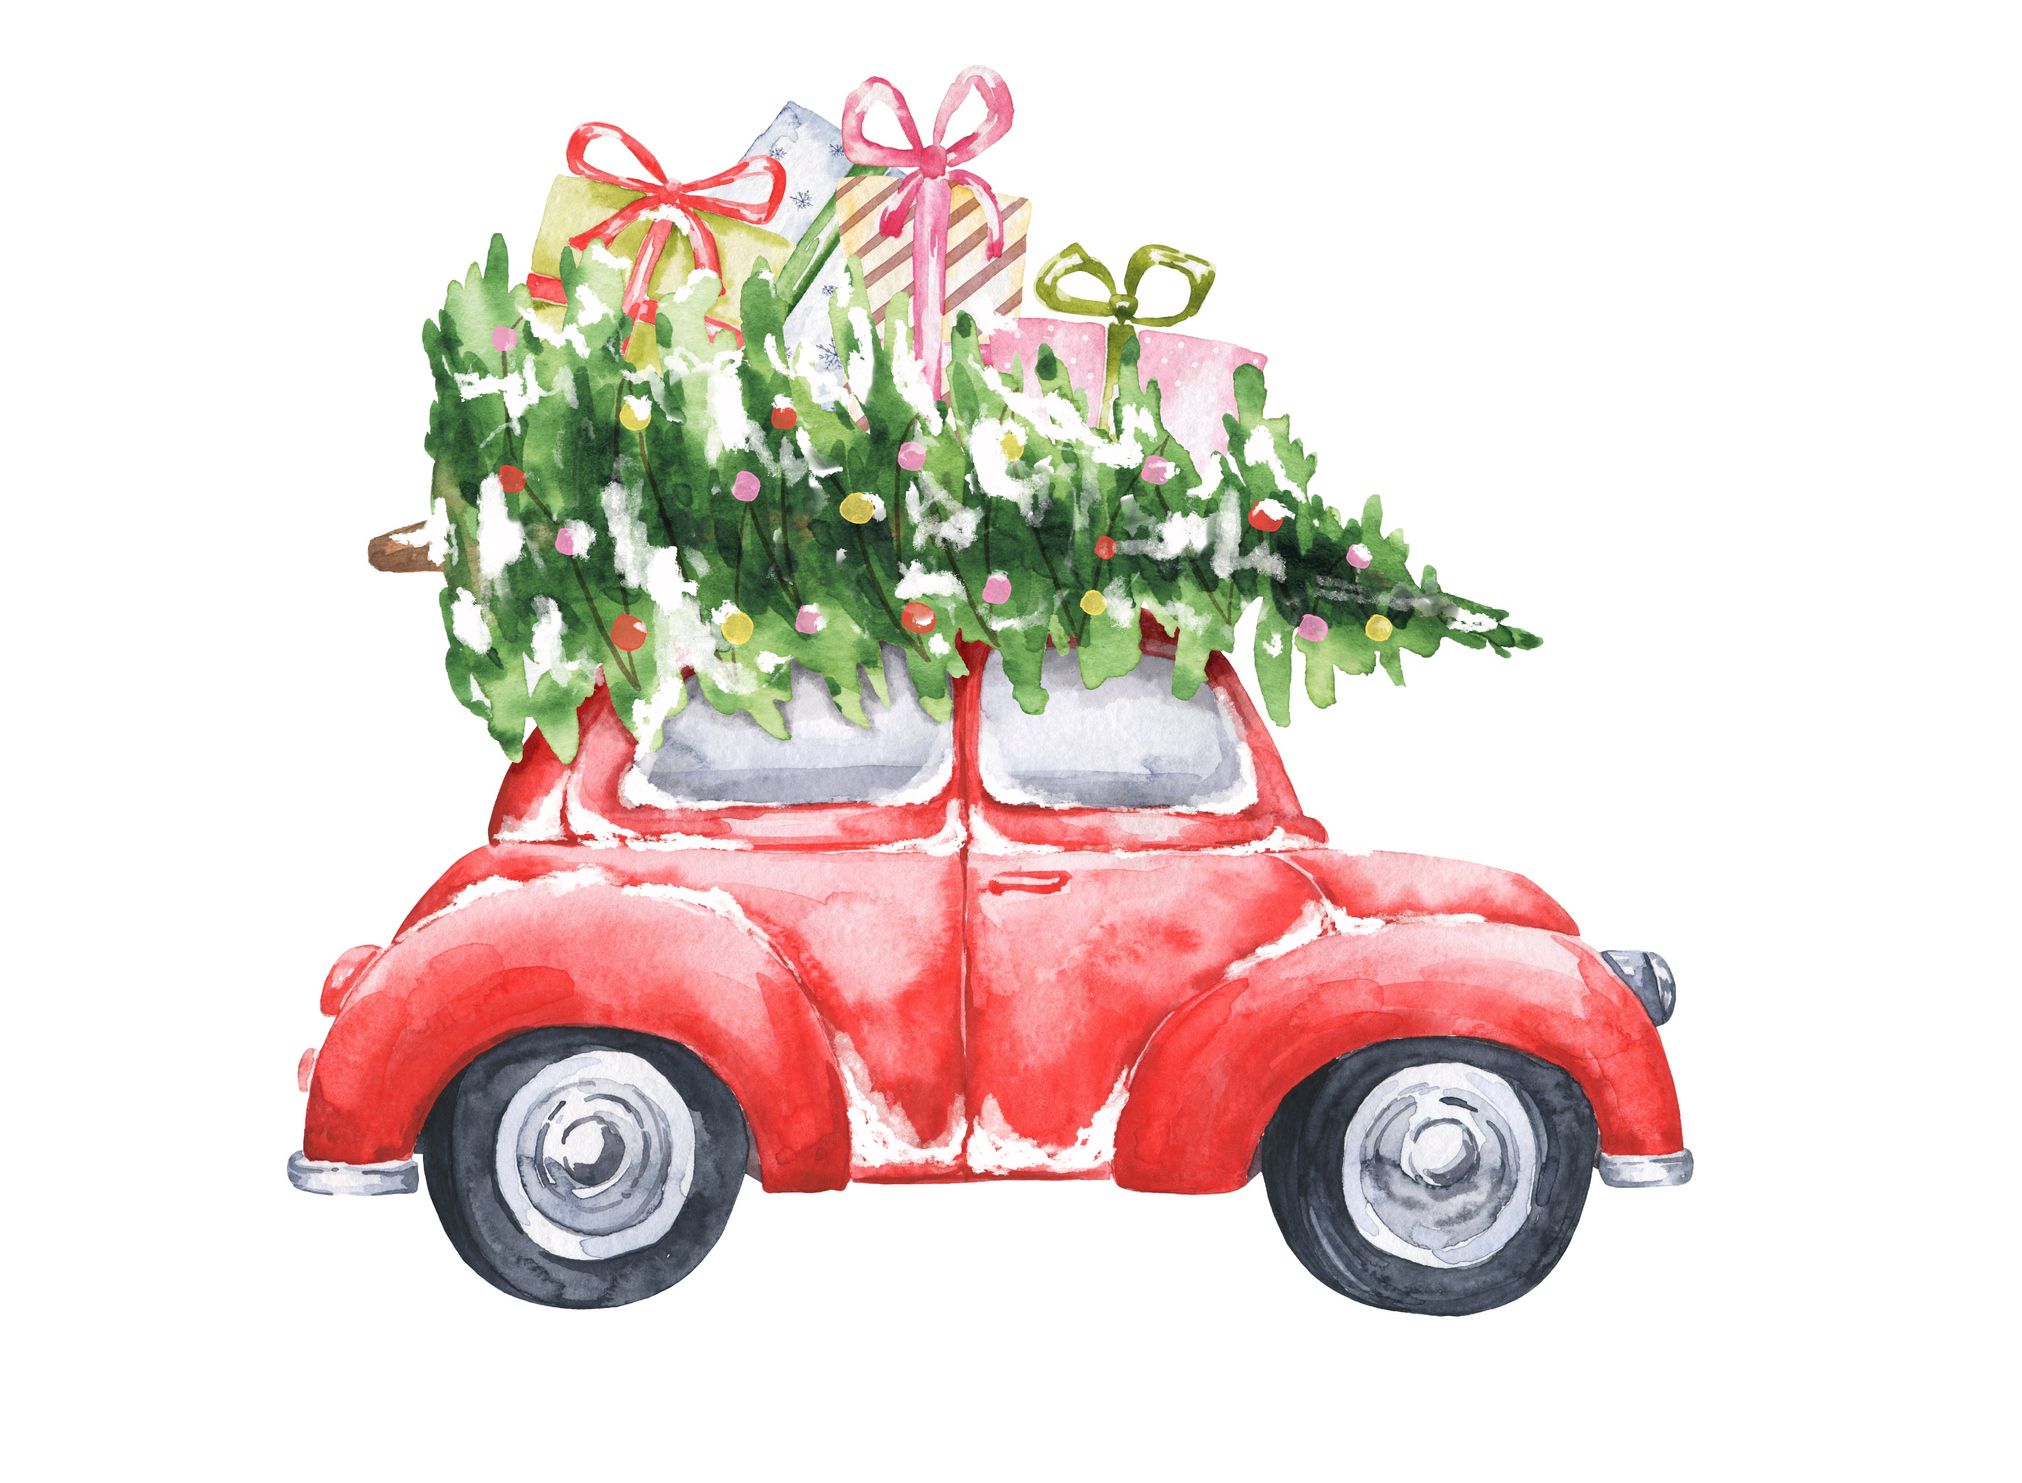 Watercolor Christmas tree with red car and present boxes on white background.